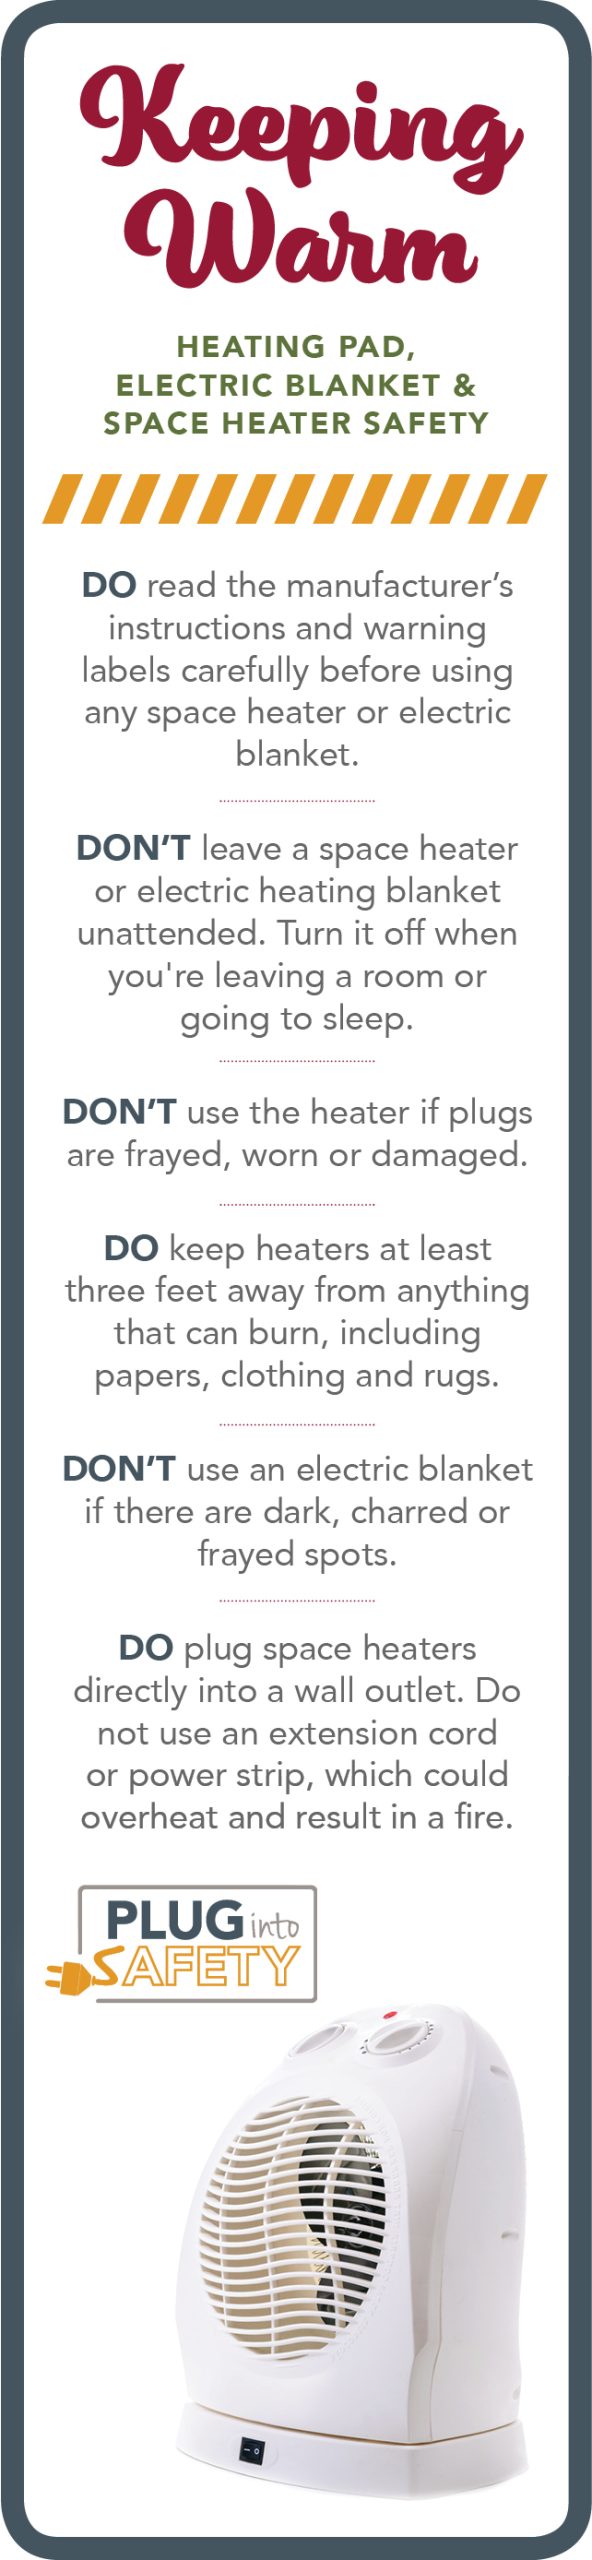 Space heater safety graphic